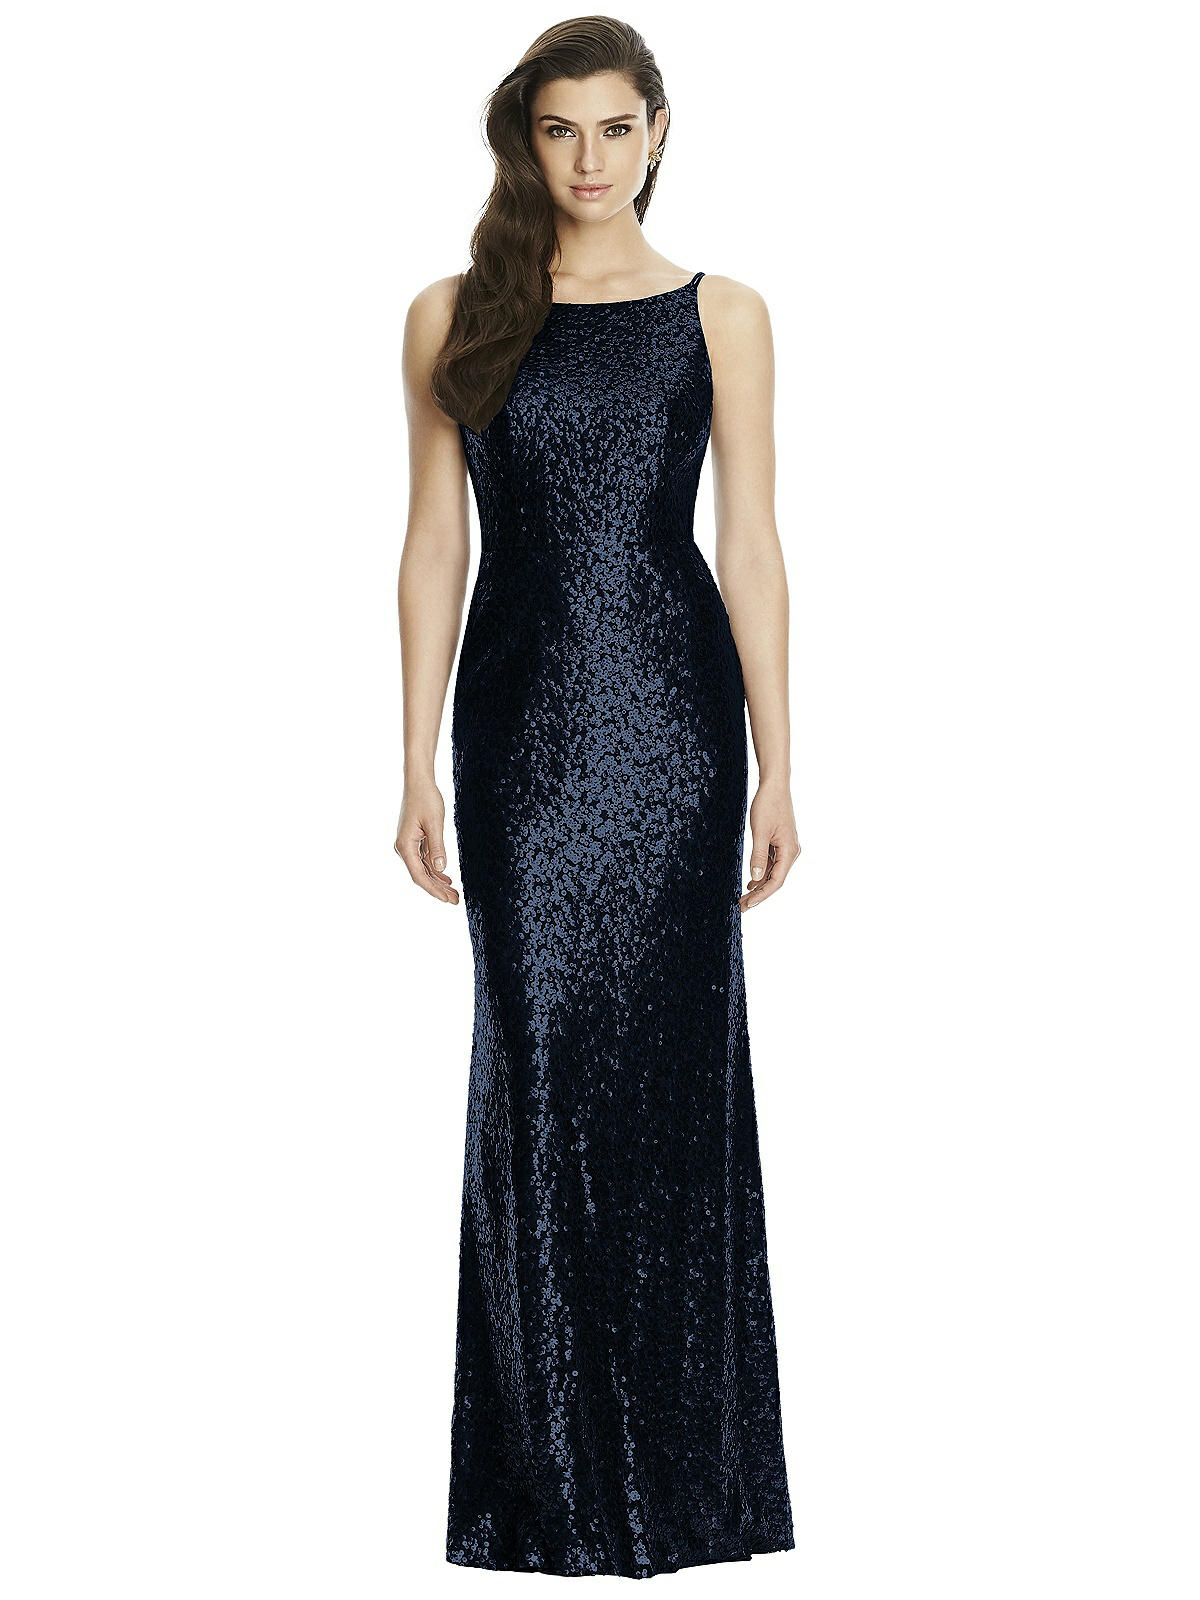 Dessy Bridesmaid Dress 2993 In Midnight Navy | The Dessy Group